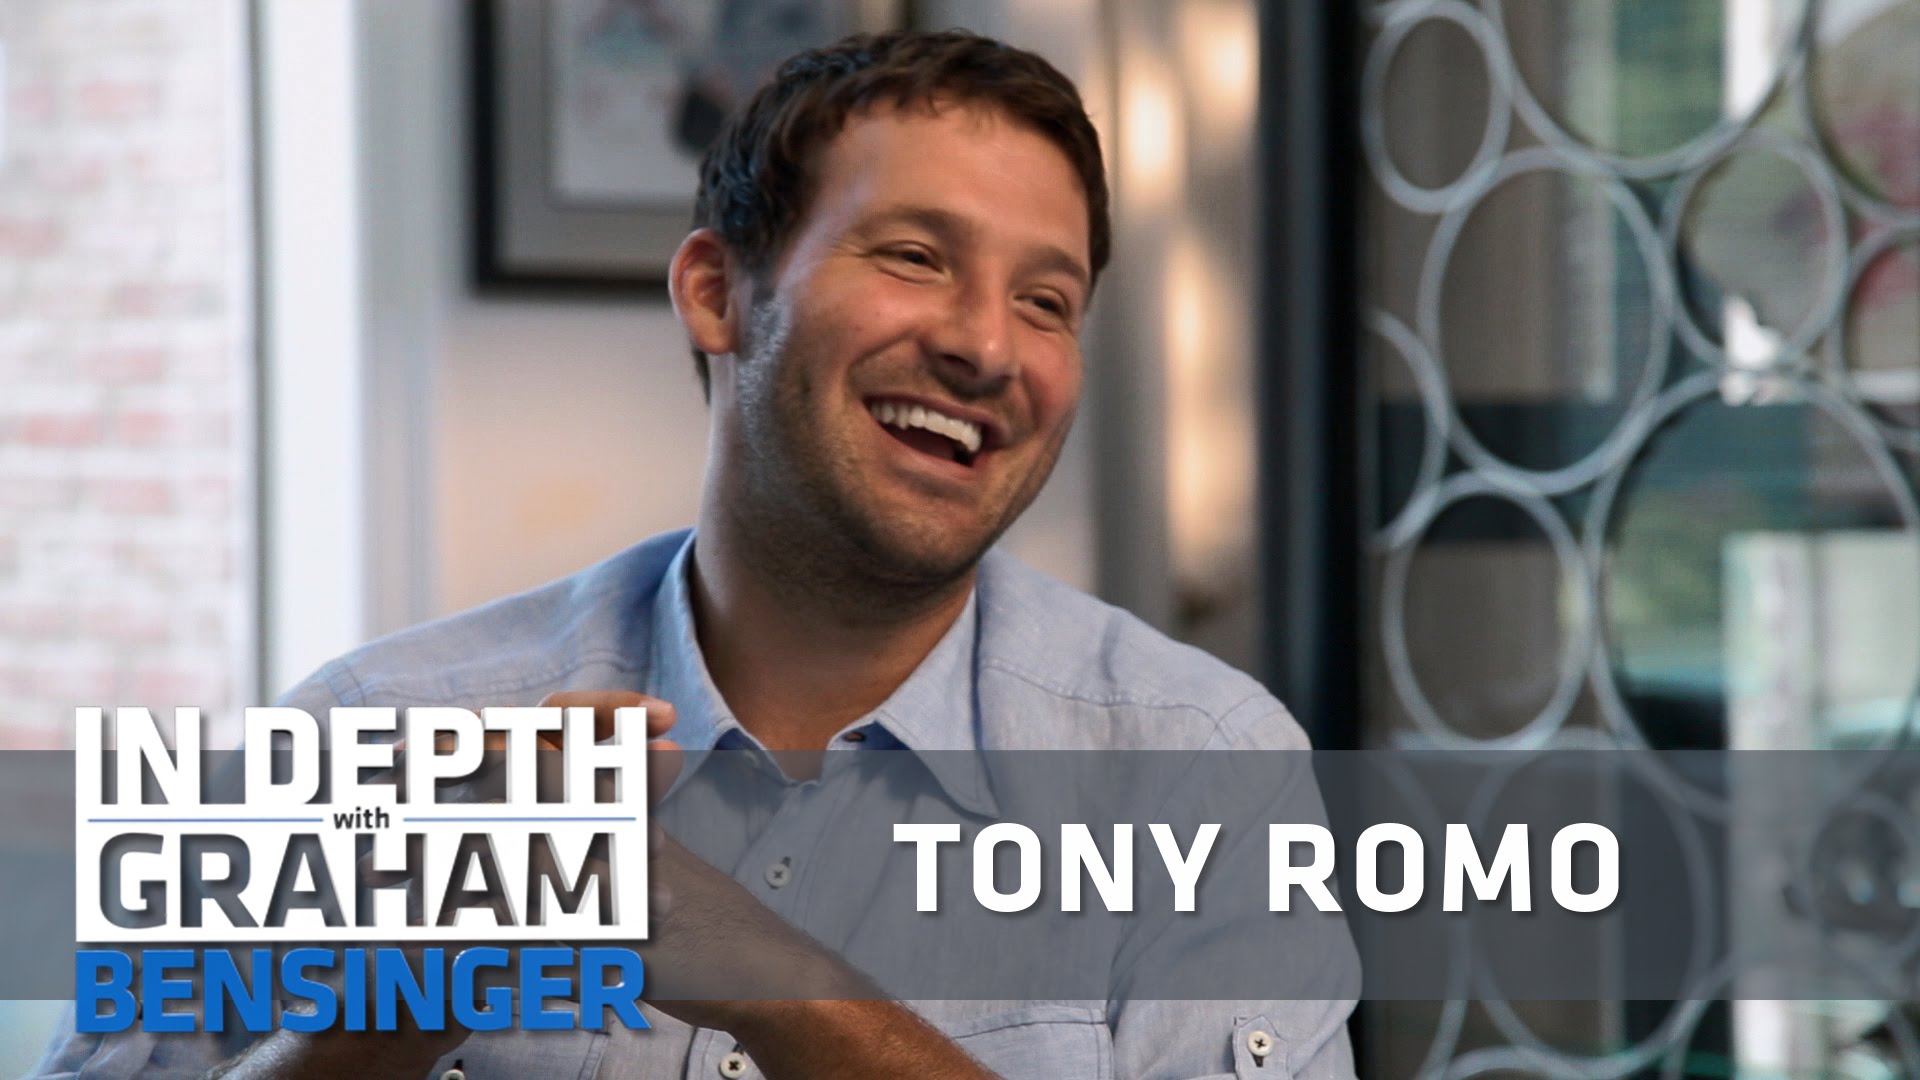 Tony Romo speaks on embarrassing his buddy in NCAA Football video game